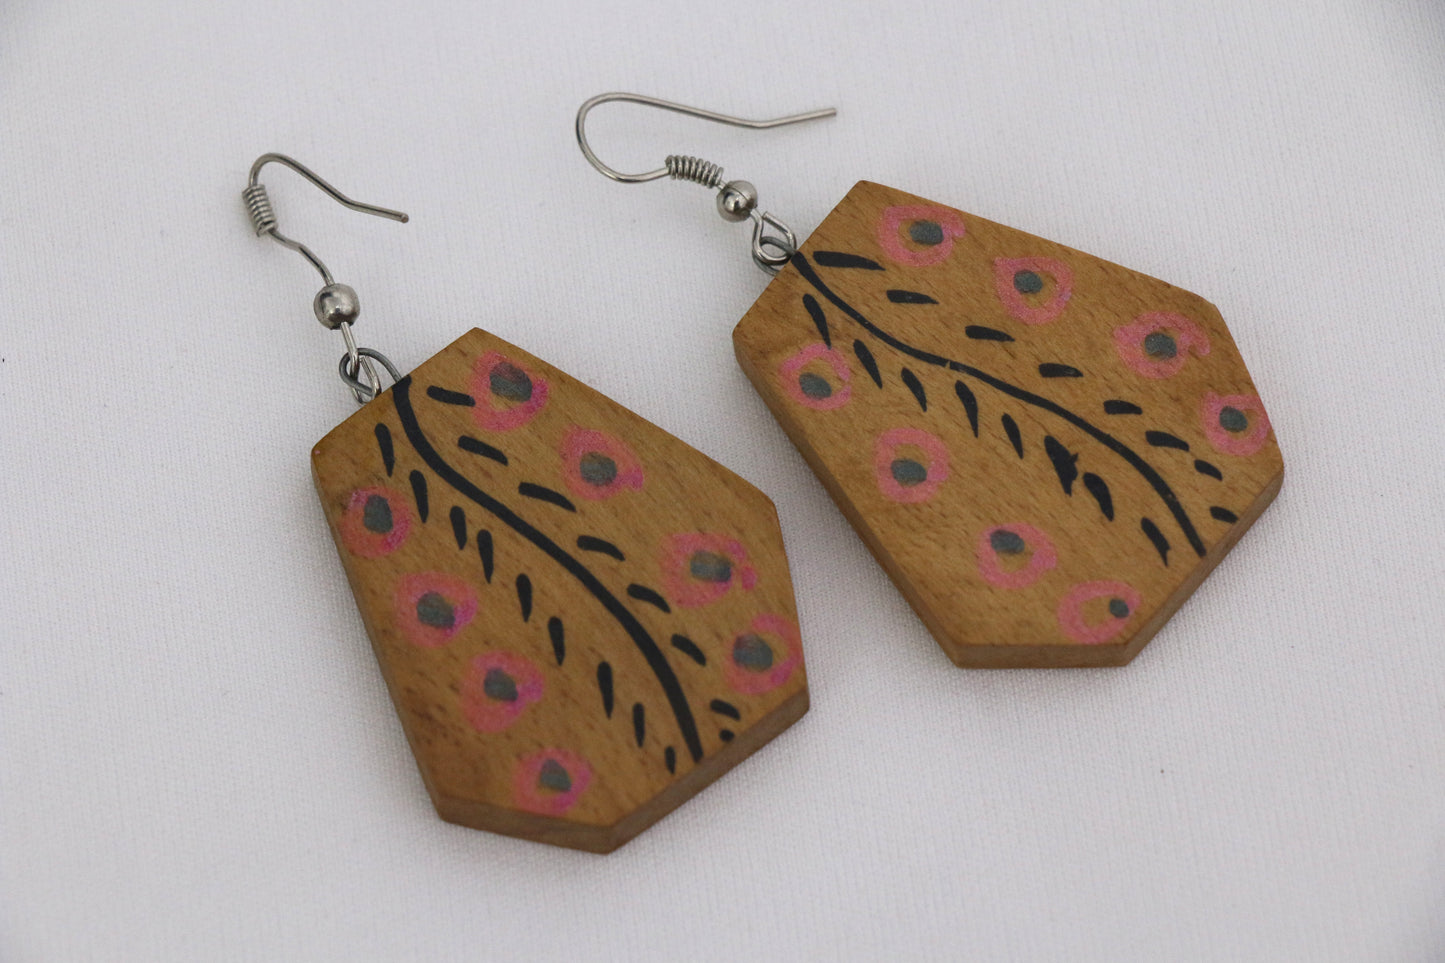 Channapatna wood craft –Locally crafted – Wooden Earrings – Natural wood color with tribal pattern -  For Kids / Adults -  P000160